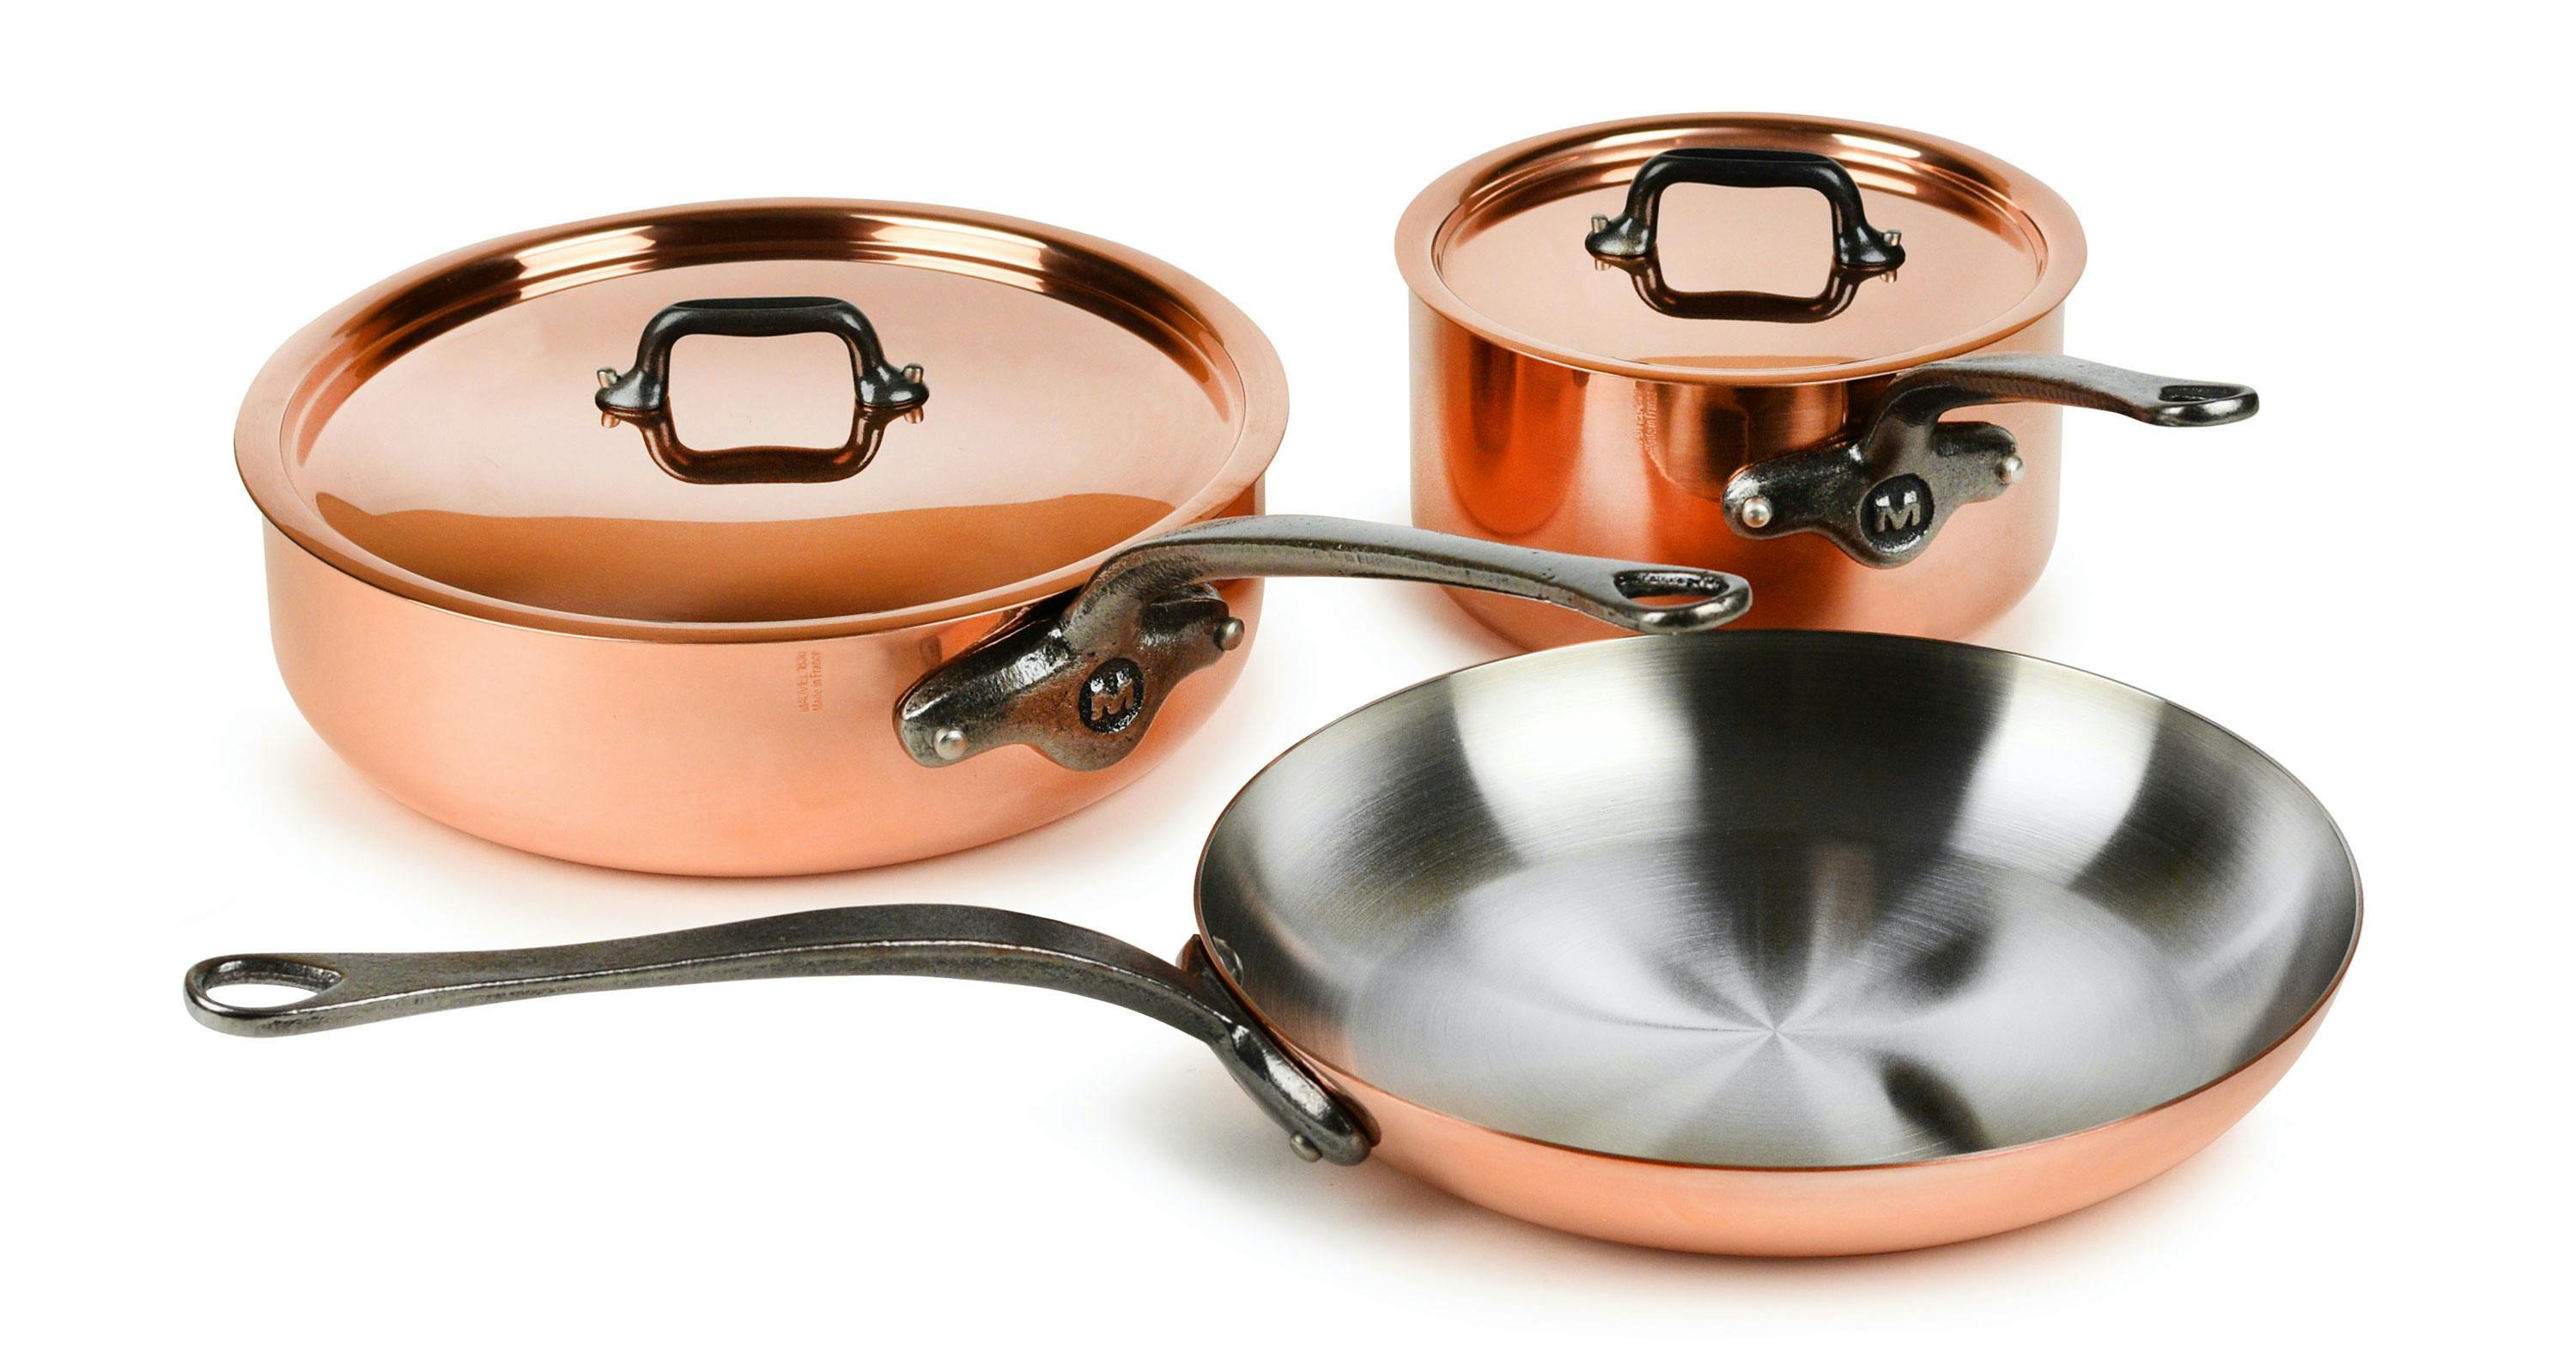 How To Choose The Best Pots & Pans For Your Kitchen